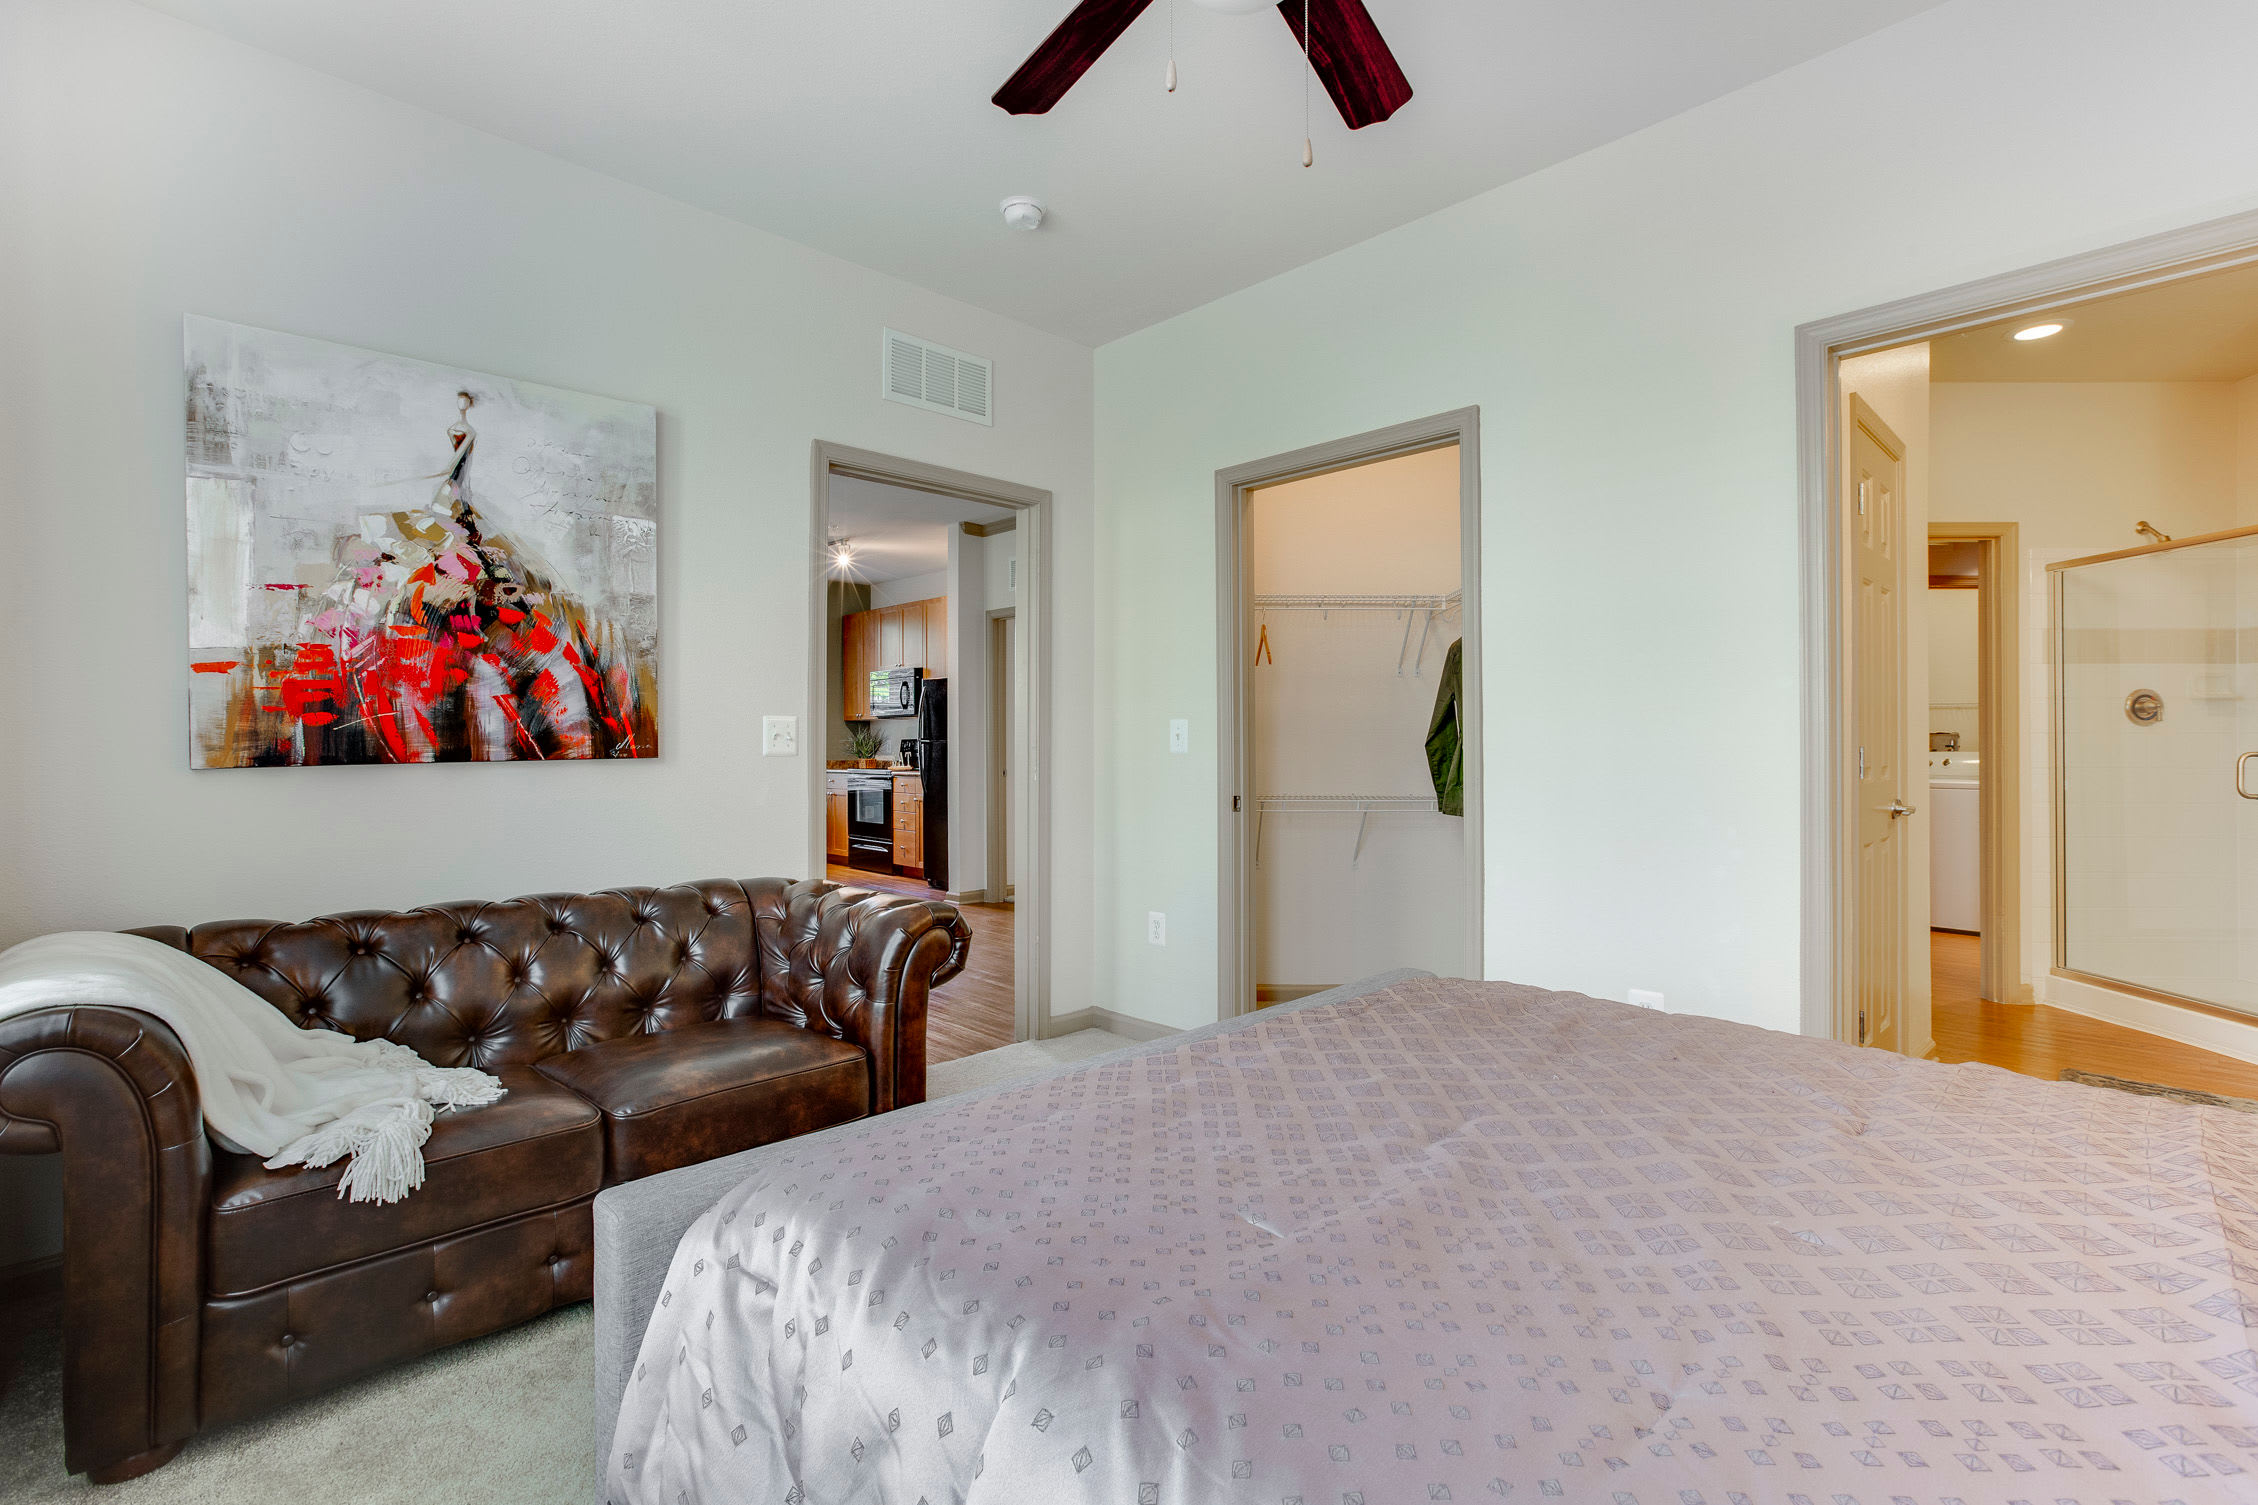 Bedroom with a couch at Summerfield at Morgan Metro in Hyattsville, Maryland